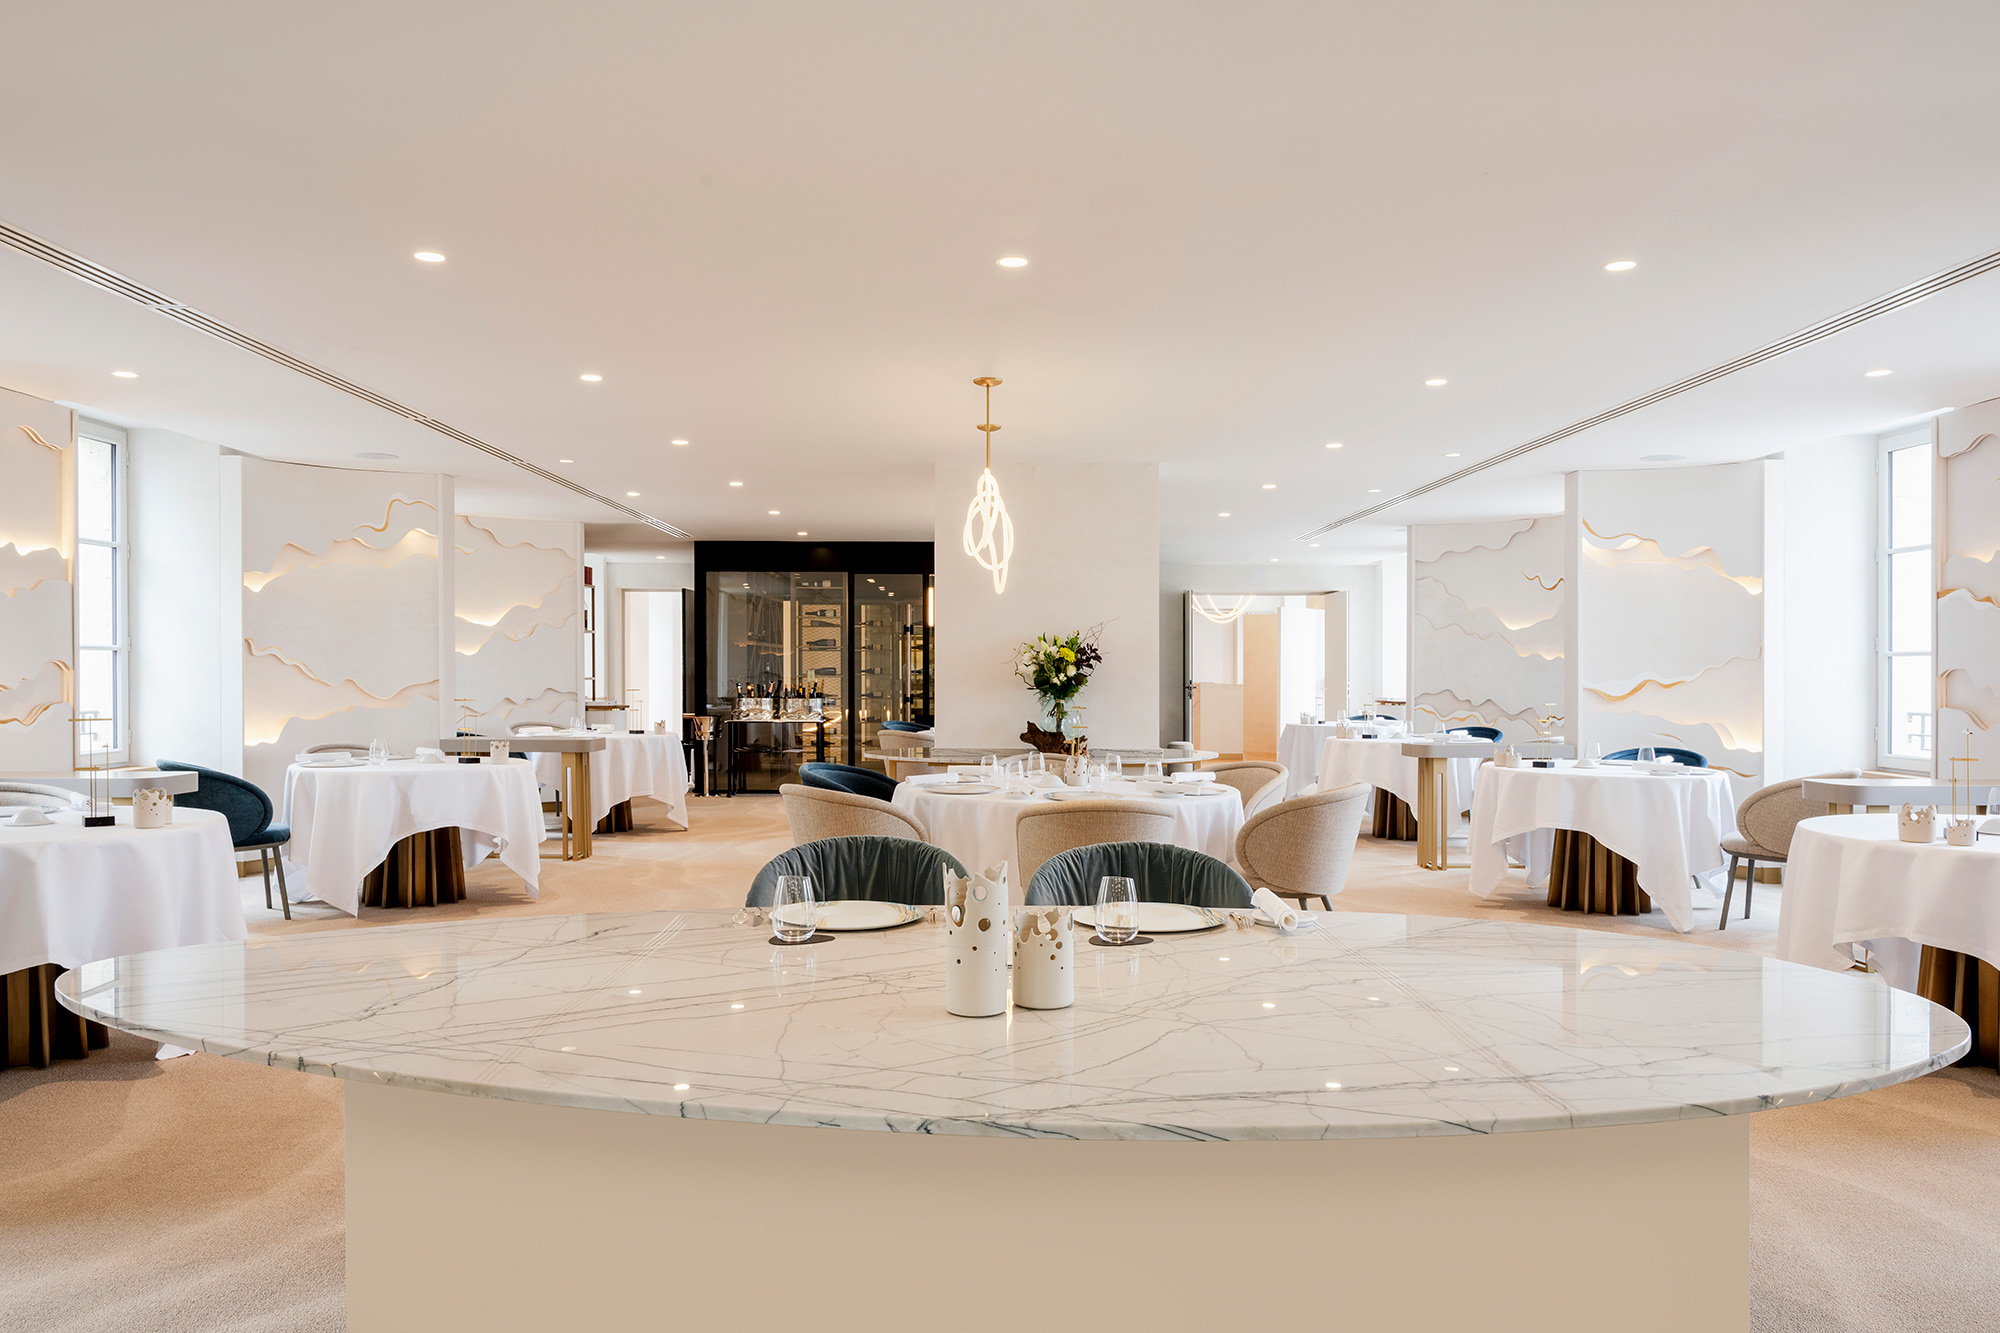 Image of Hotel Fleur de Loire 13 in The sophistication and strength of Cosentino brands for award-winning chef Christophe Hay’s new 5-star hotel  - Cosentino